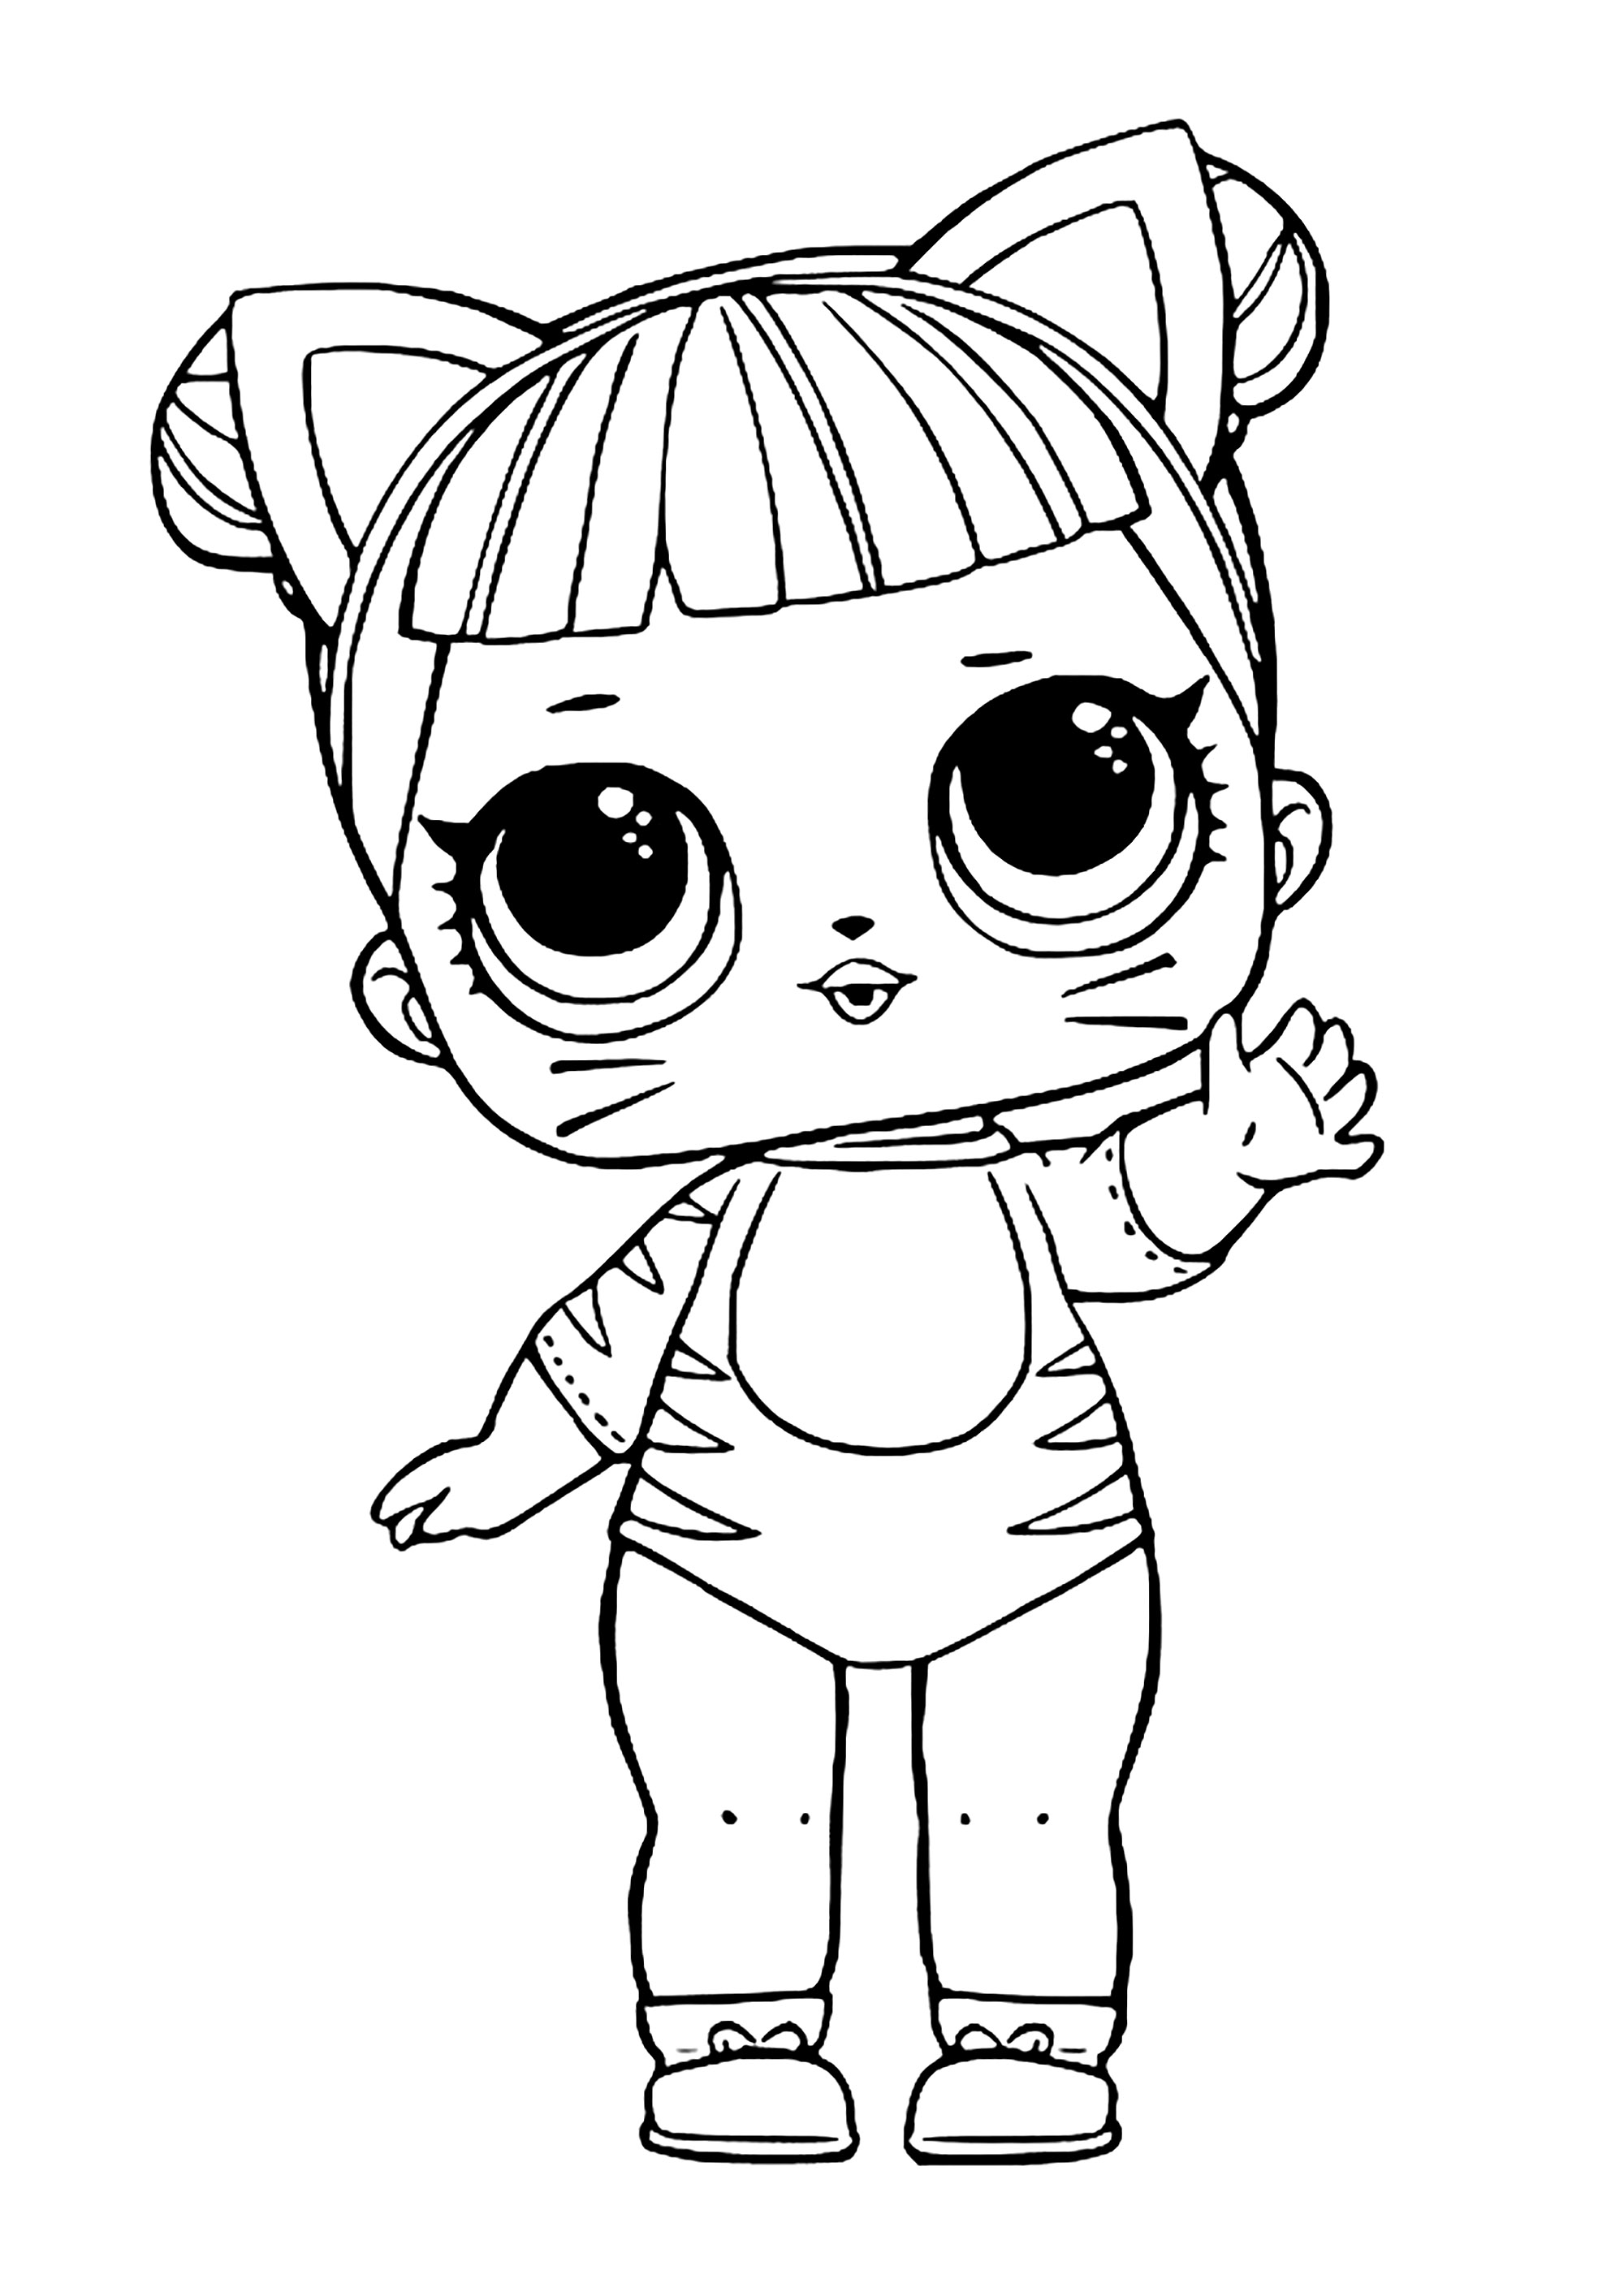 LOL surprise coloring page, LOL doll coloring pages, LOL surprise, LOL  pets coloring page